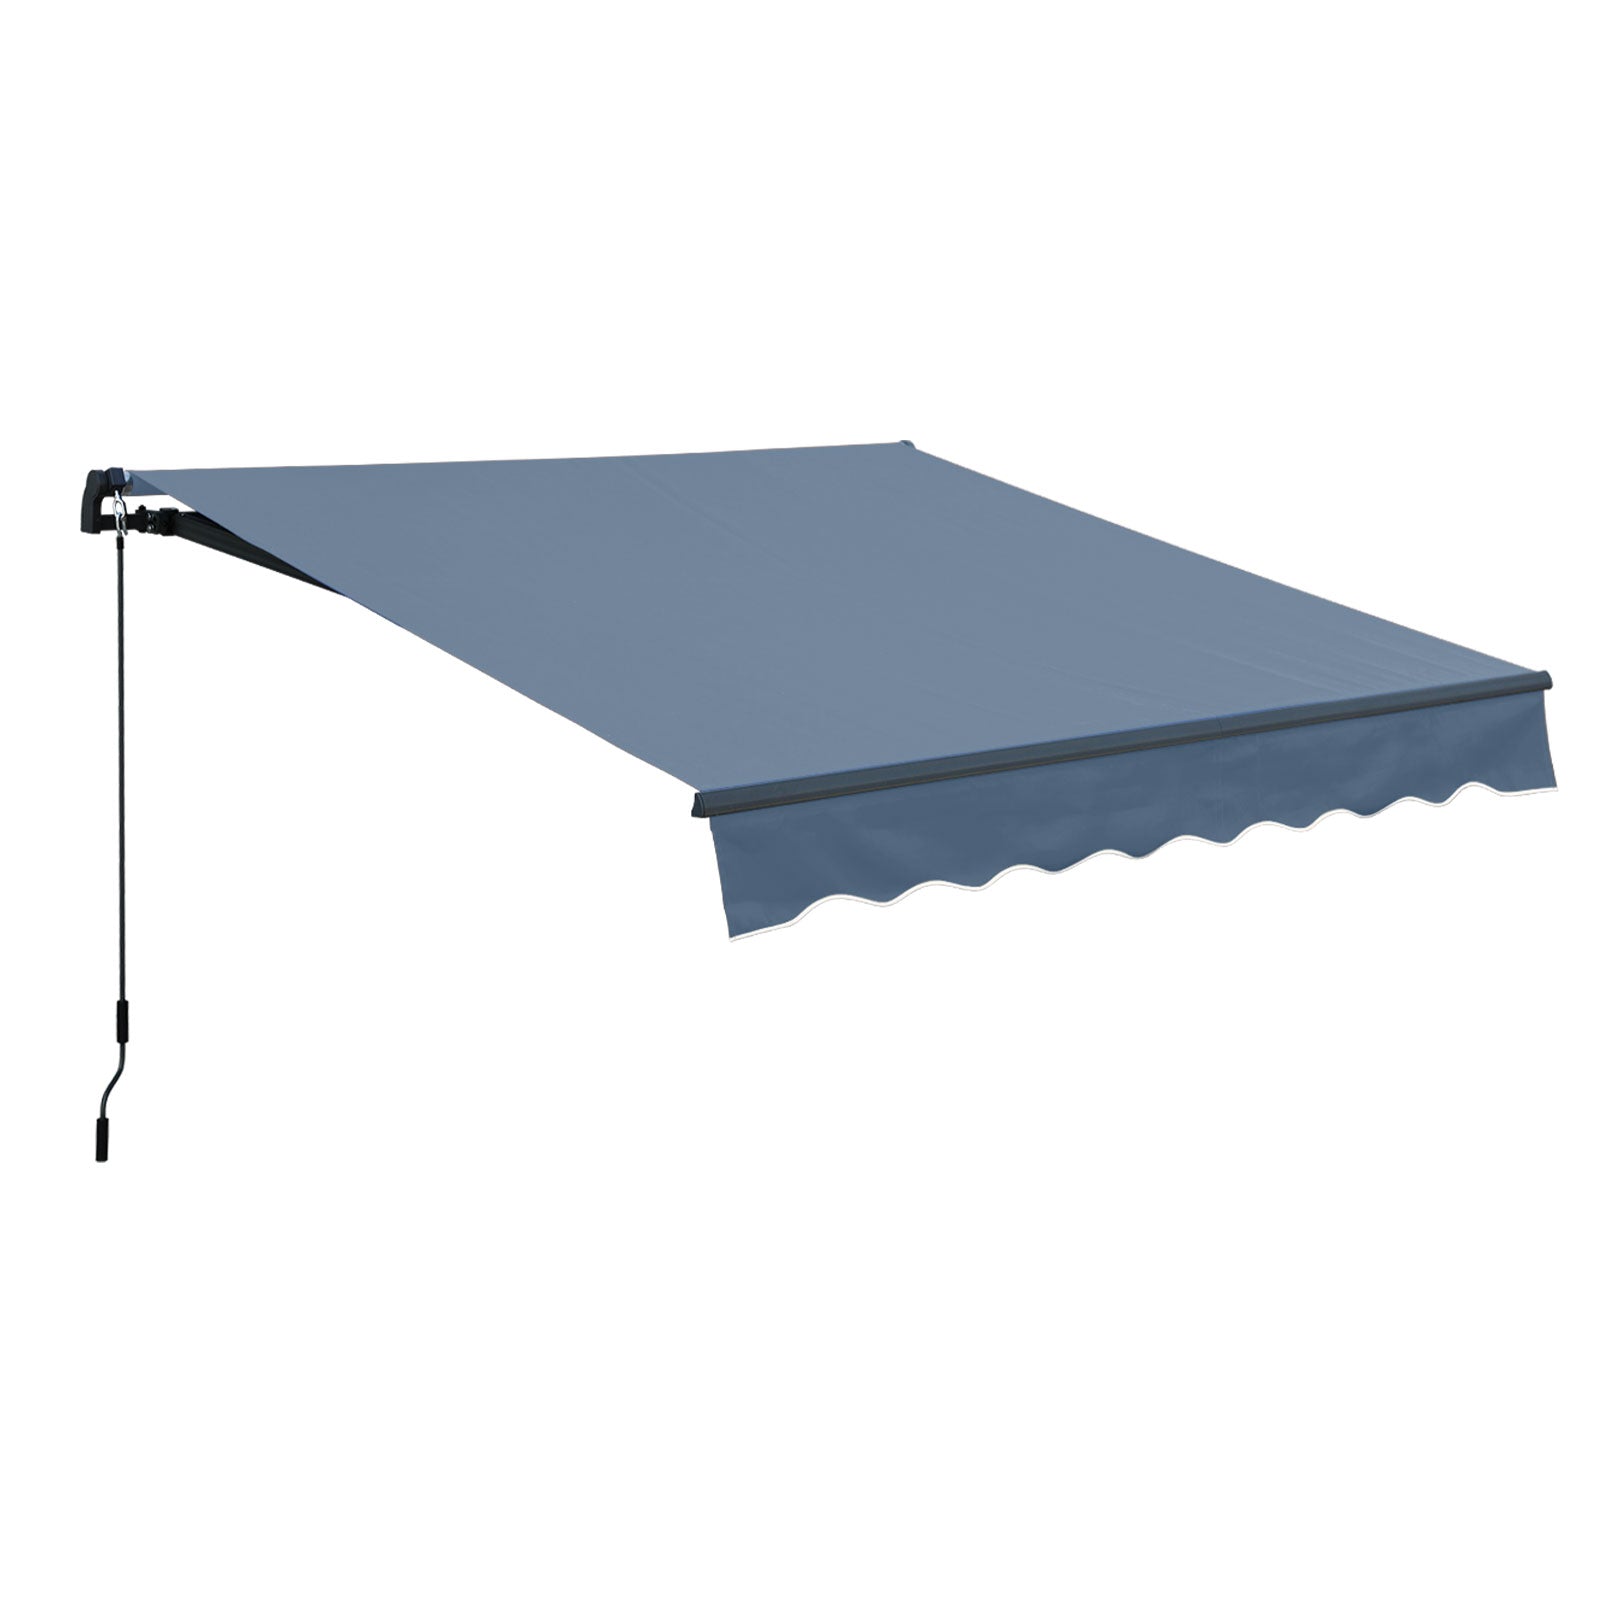 10' x 8' x 5' Retractable Window Awning Sunshade Shelter,Polyester Fabric,with Brackets and Two Wall Bases  Aoodor  Gray  